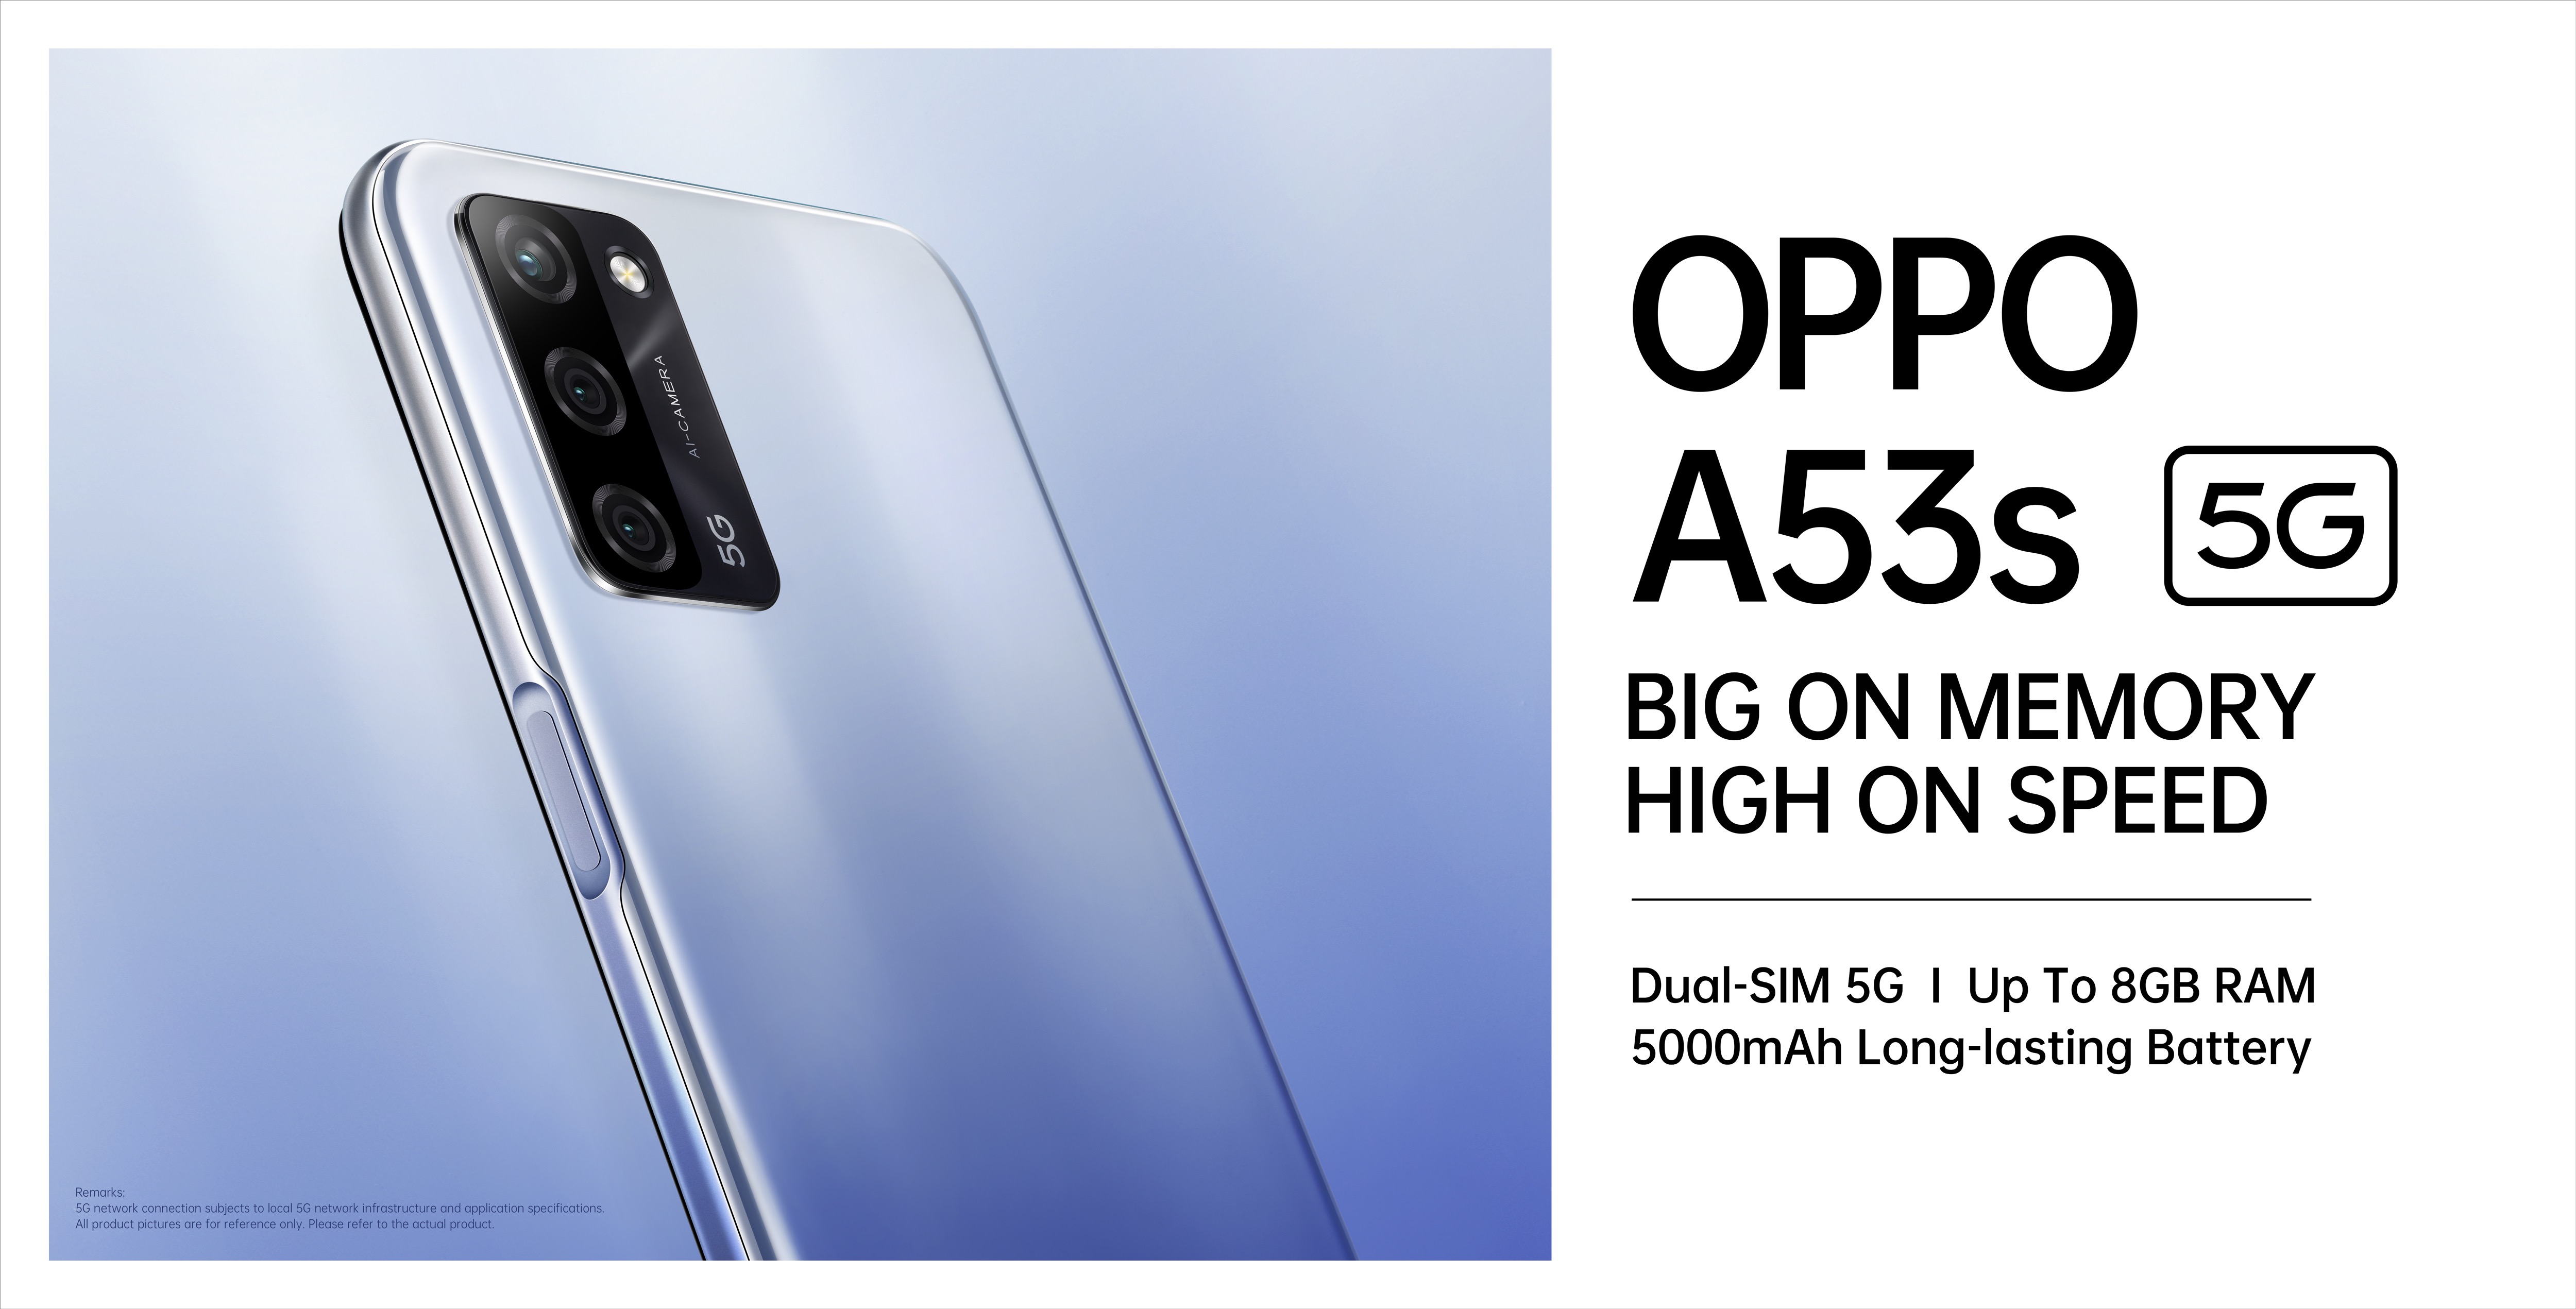 OPPO A53s 5G: India's most affordable 5G phone, with MTK Dimensity 700, priced only at INR 14,990